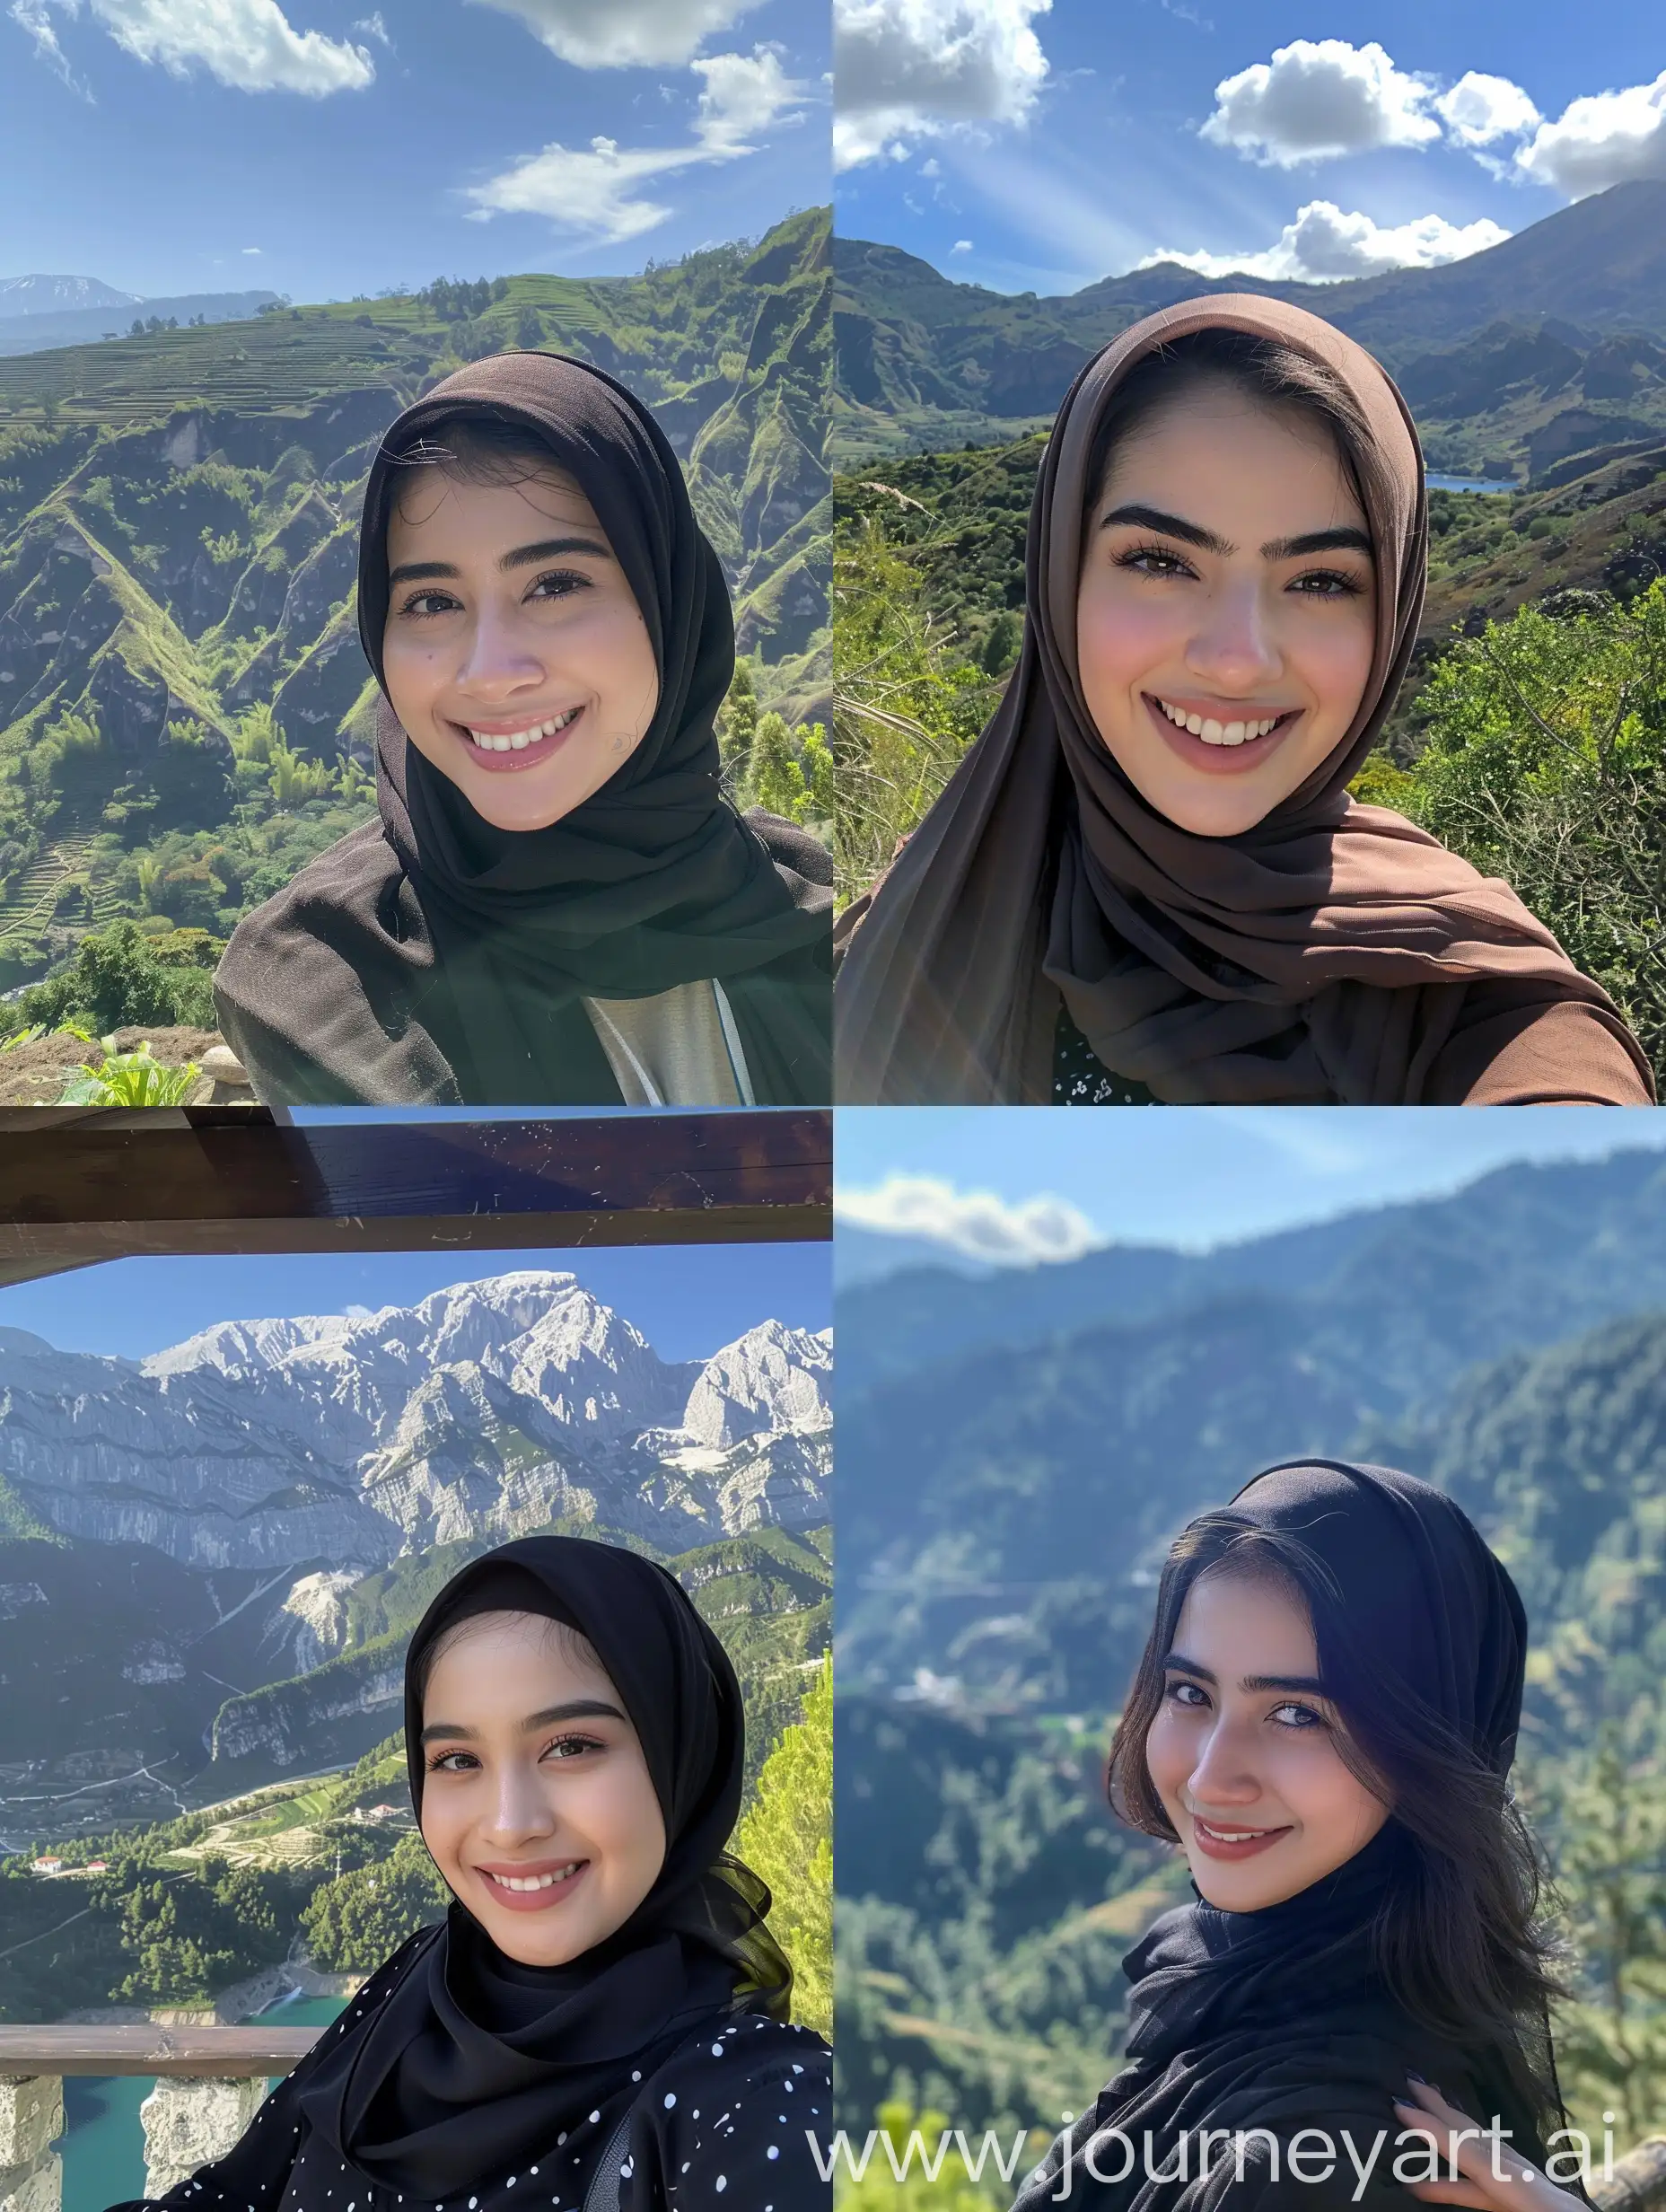 A typical Instagram selfie taken on iPhone. A dark-haired young woman poses in front of a beautiful mountain landscape, smiling brightly. The woman hijab looks happy, but tired. The image is a phone shot of low quality